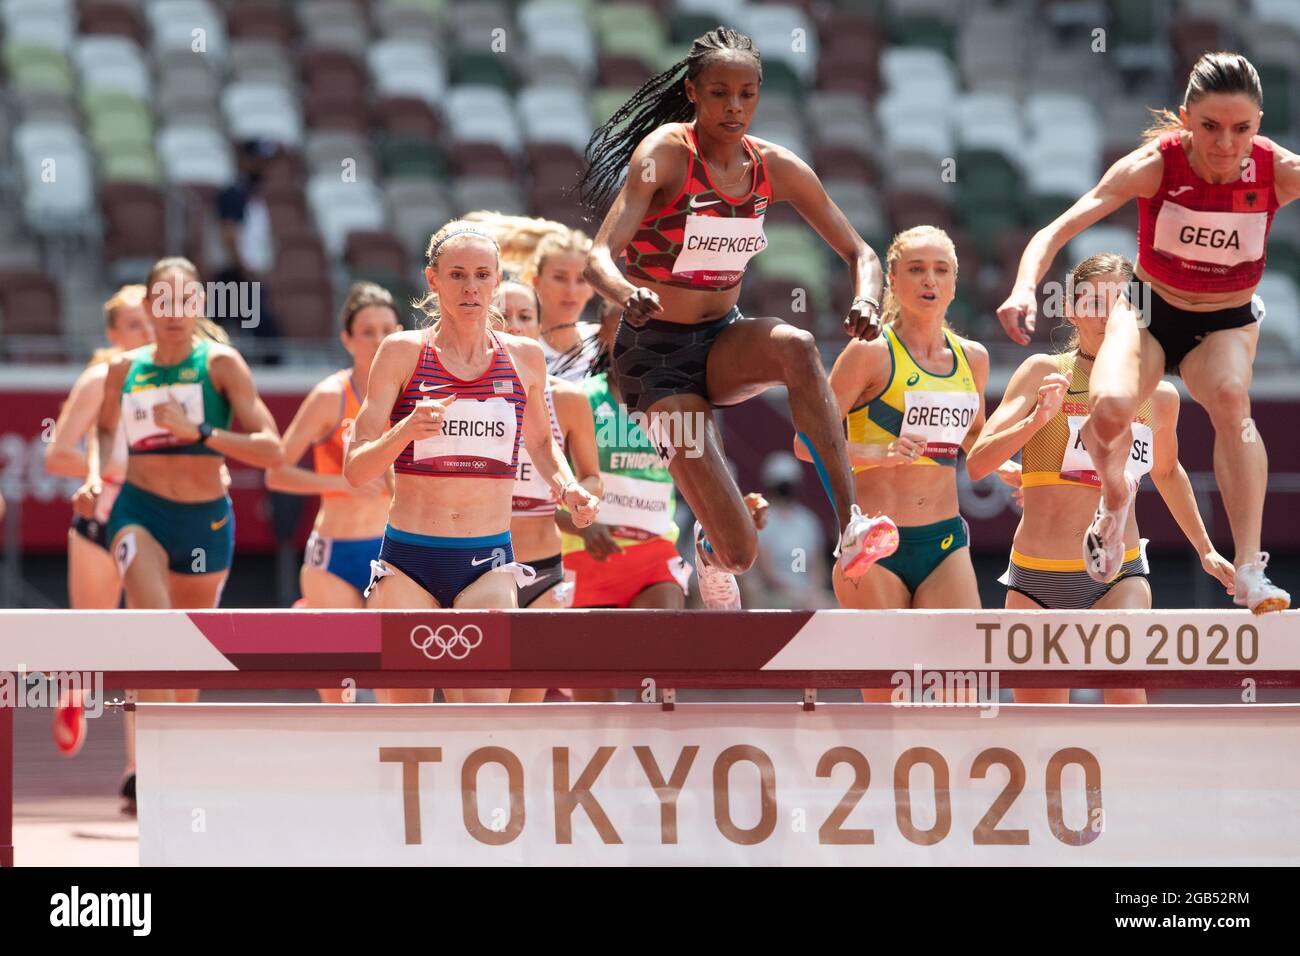 August 01, 2021: Beatrice Chepkoech (2752) of Kenya and Luiza Gega {1003) of Albania jump the barrier in the 3000m Steeplechase during Athletics competition at Olympic Stadium in Tokyo, Japan. Daniel Lea/CSM} Stock Photo